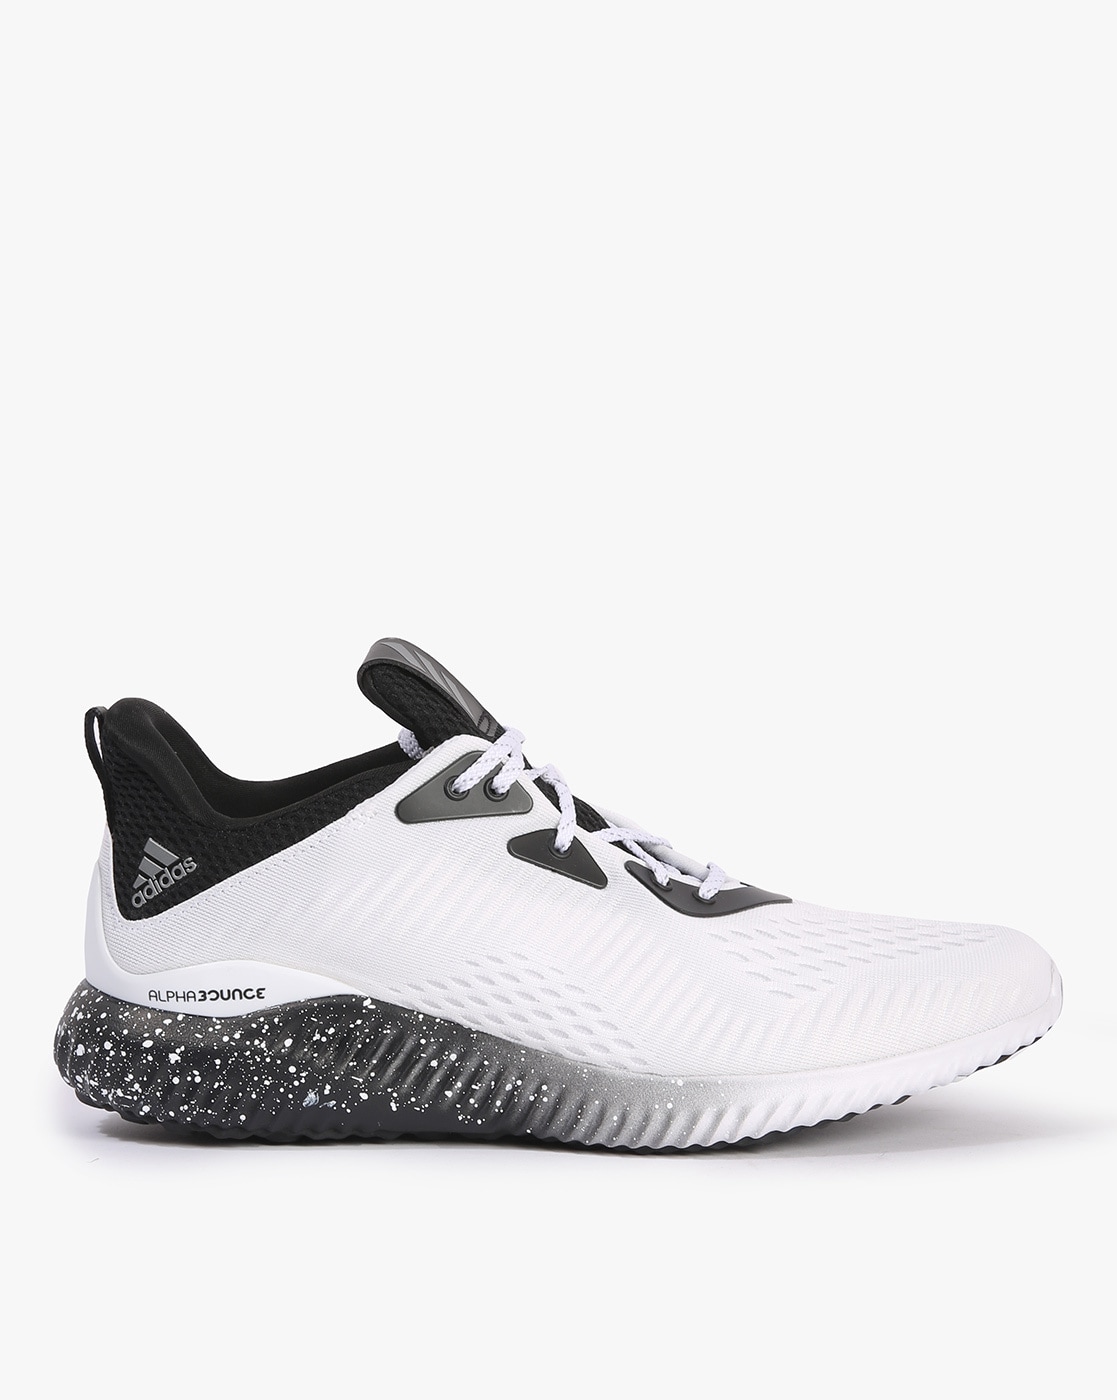 ADIDAS ALPHABOUNCE 1 PARLEY M Running Shoes For Men - Buy  NONDYE/NONDYE/VAPBLU Color ADIDAS ALPHABOUNCE 1 PARLEY M Running Shoes For  Men Online at Best Price - Shop Online for Footwears in